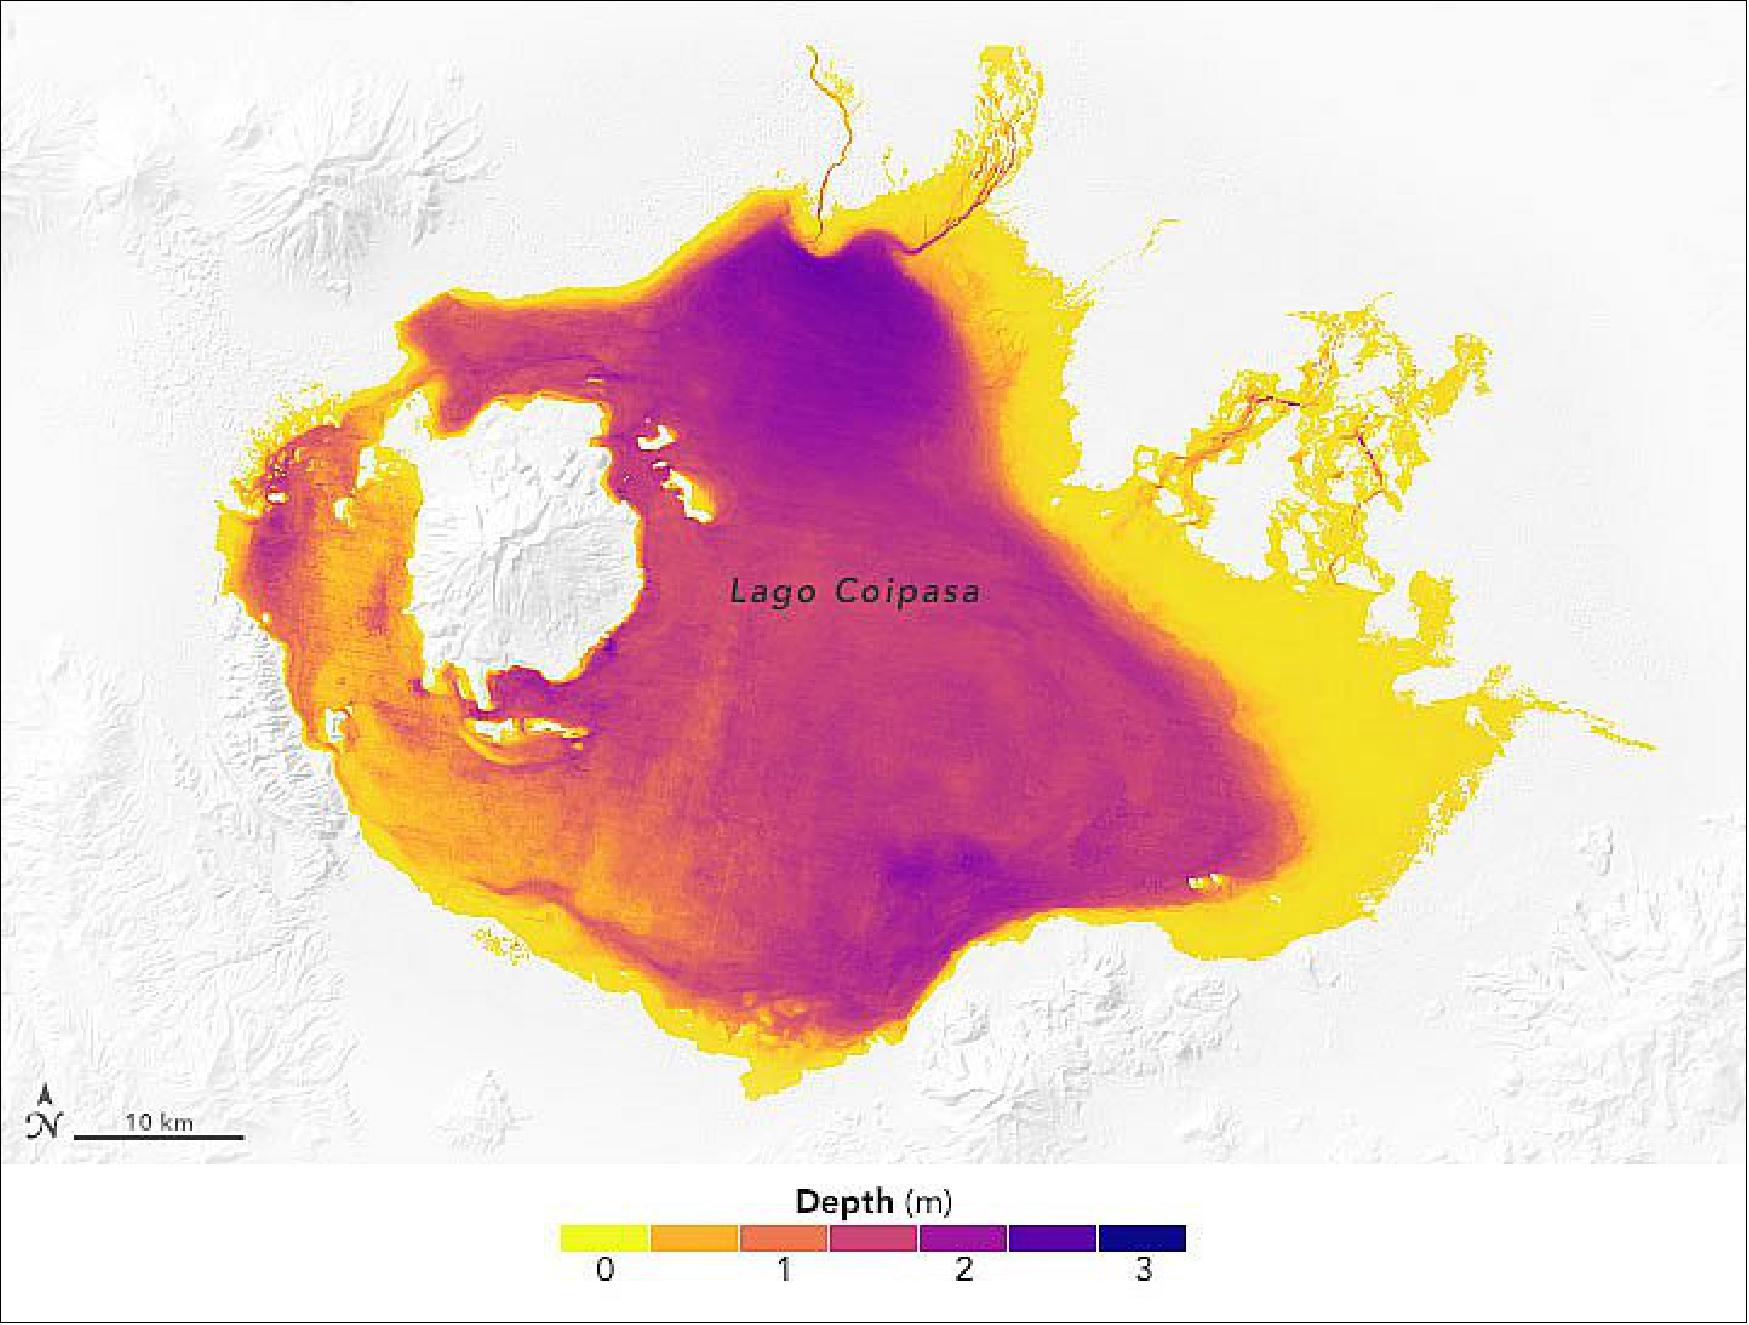 Figure 17: This map shows the bathymetry of Bolivia’s Lago Coipasa during the wet season. Located in the Altiplano, Coipasa is an ephemeral saline lake with a maximum depth around 3.5 meters (11 feet). The lake is a popular tourist spot and adjacent to a large salt flat, where evaporation of mineral-rich waters leads to the formation of thick, flat salt deposits. The lake was previously unmapped (image credit: NASA Earth Observatory)